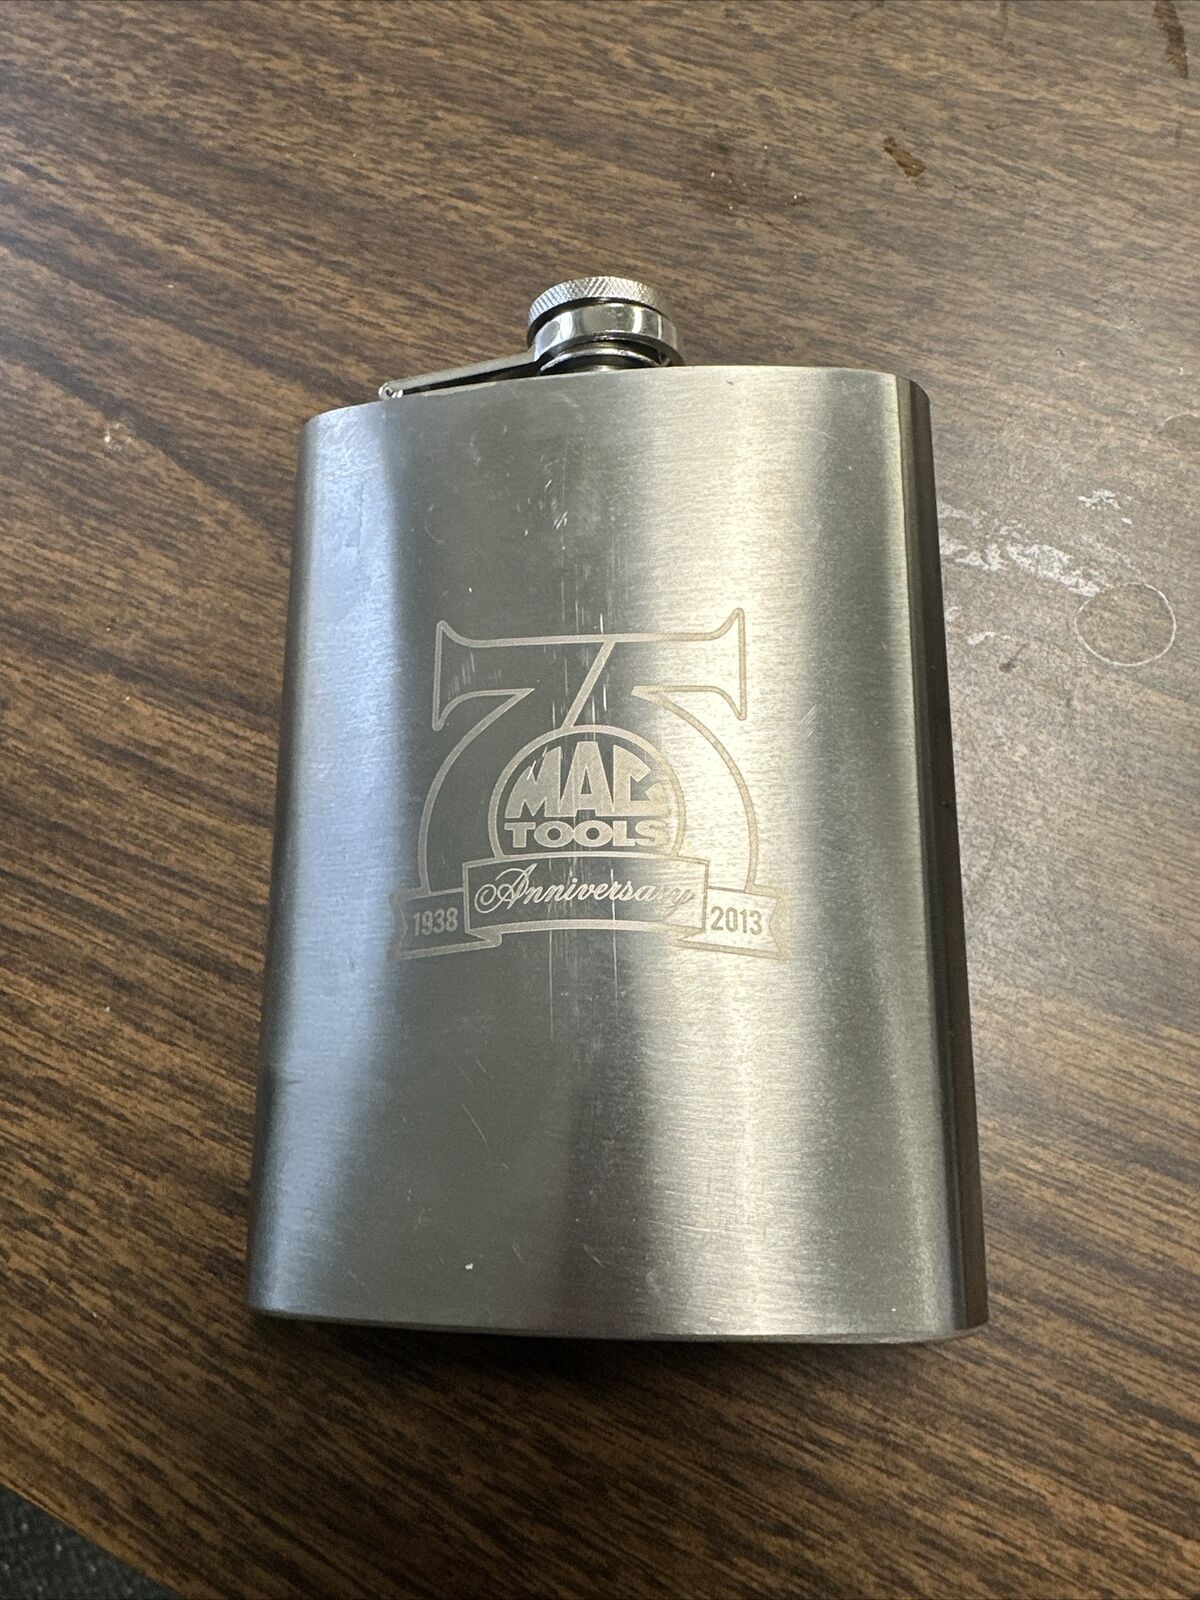 Mac Tools 75th Anniversary Flask MACFLASK75 alcohol beverage liquid container